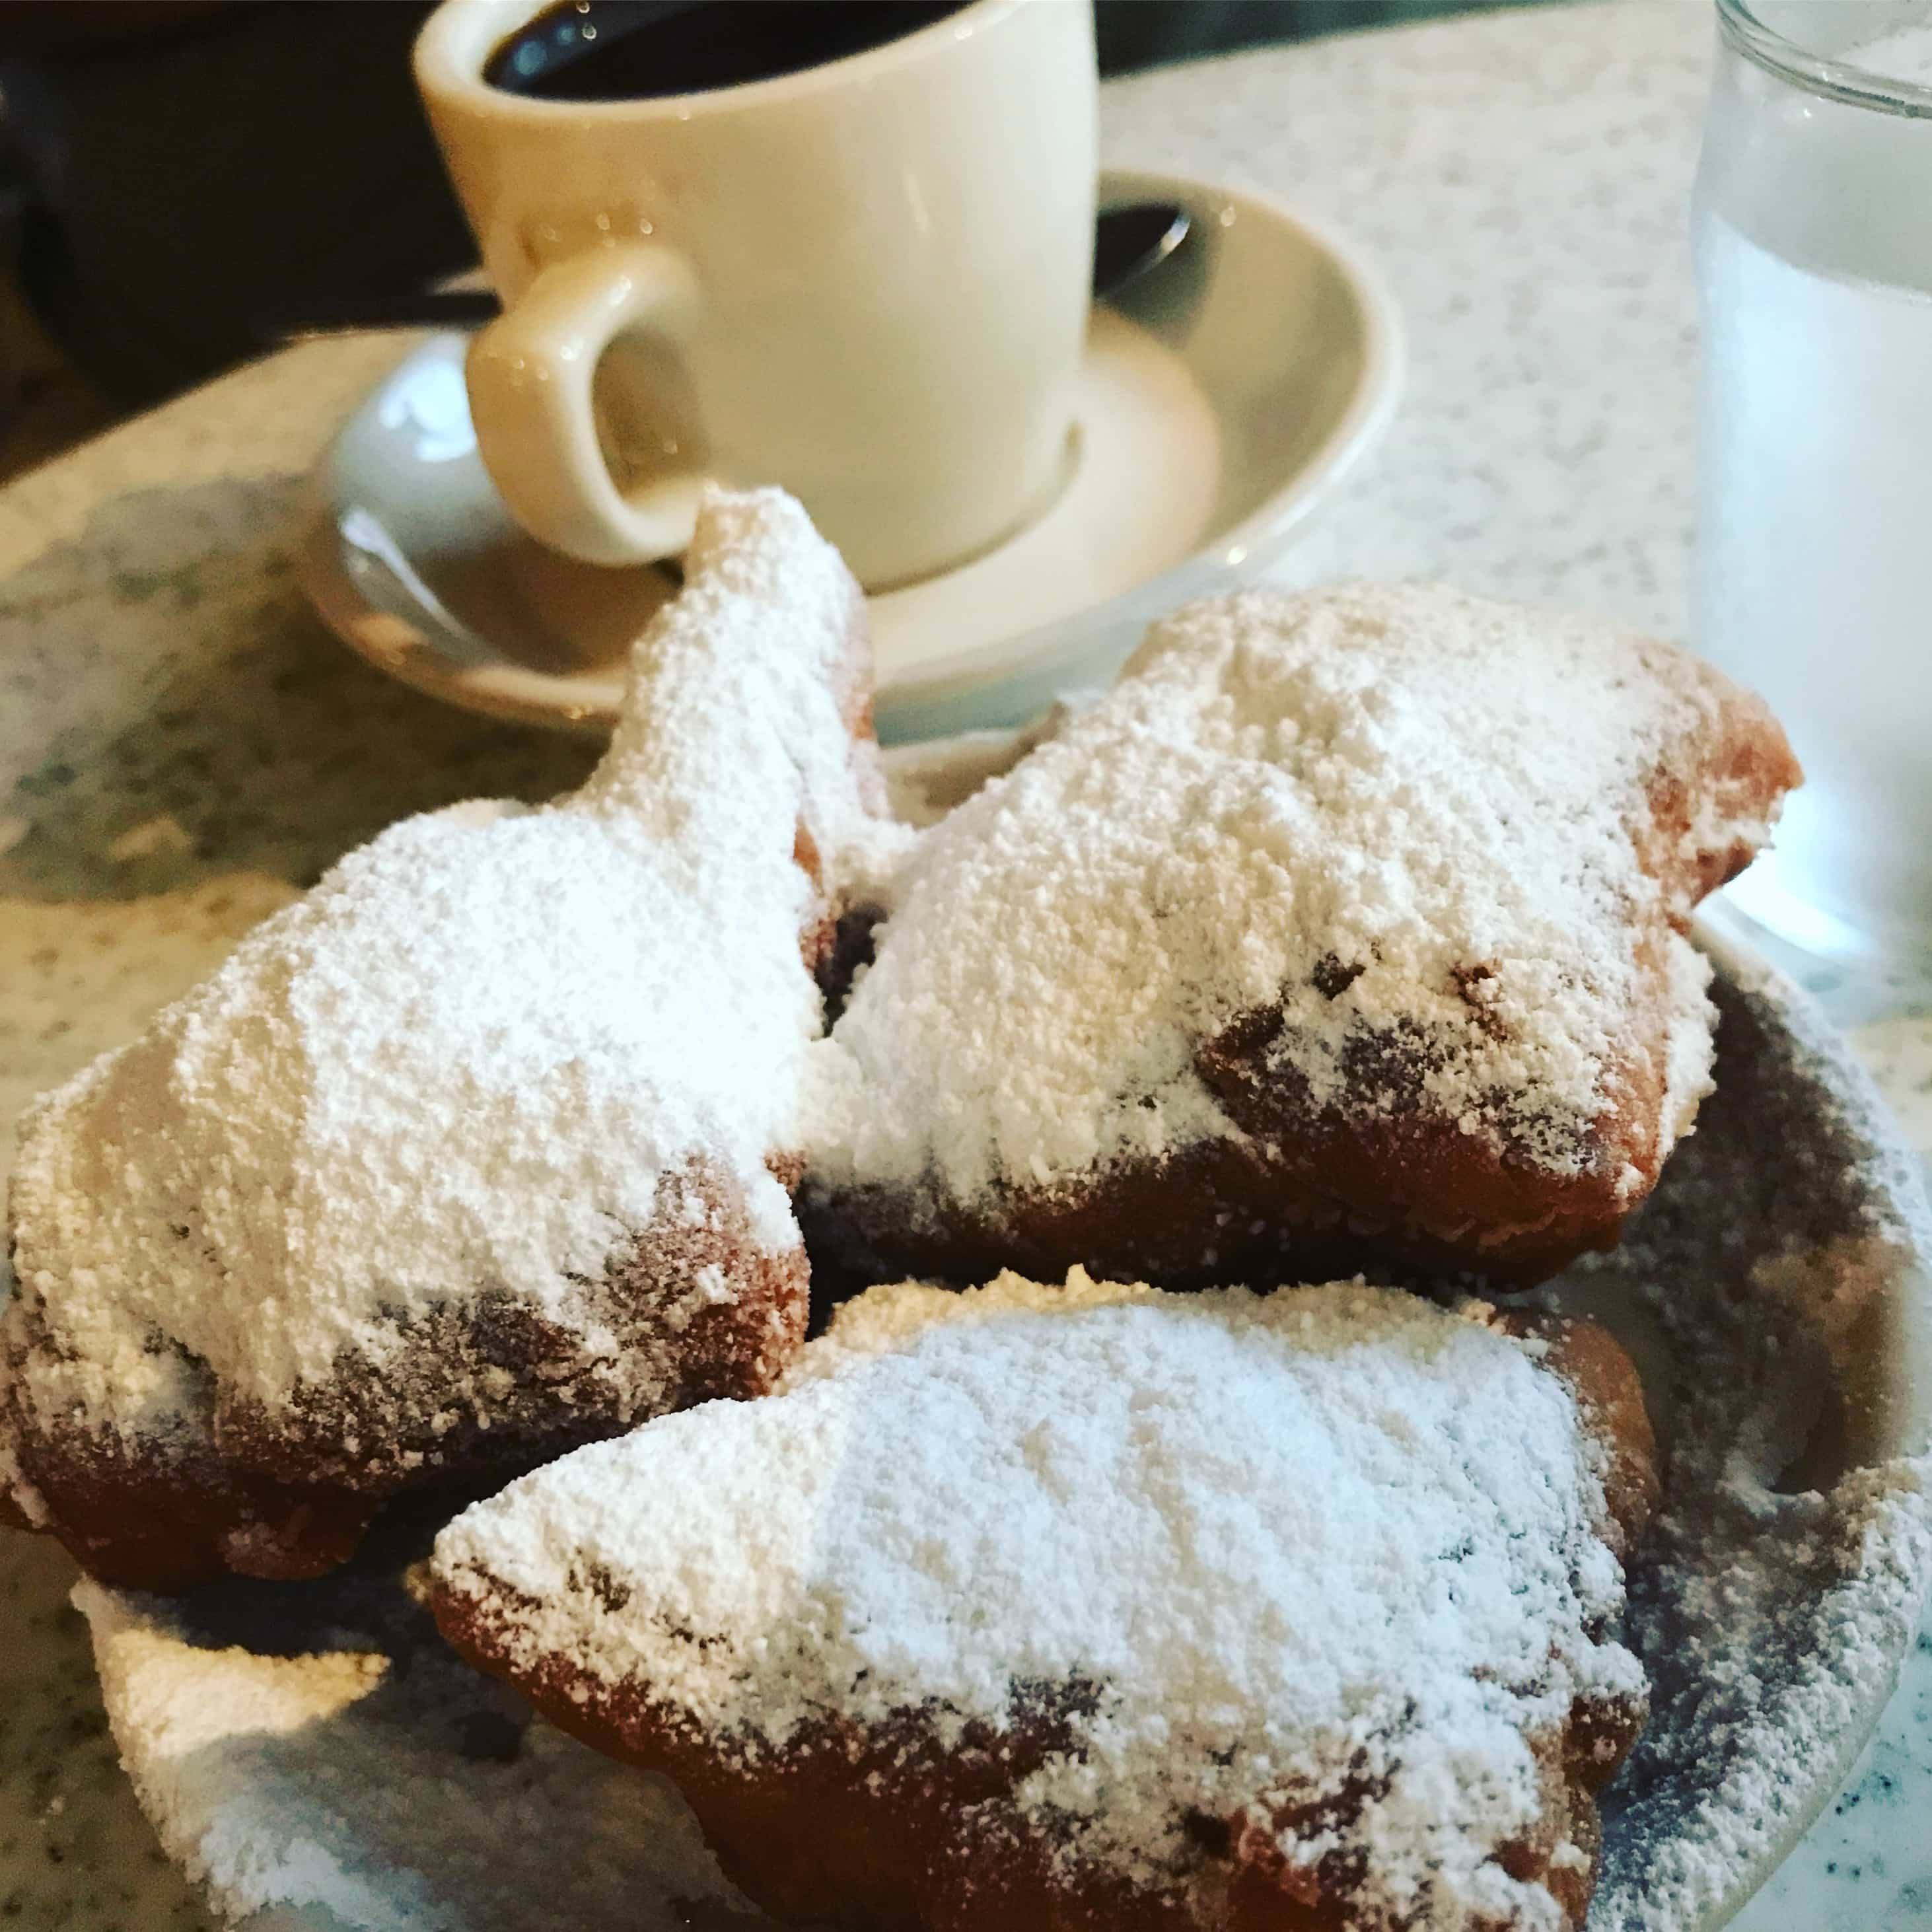 benguet of cafe dumonde Foods to Try in New Orleans